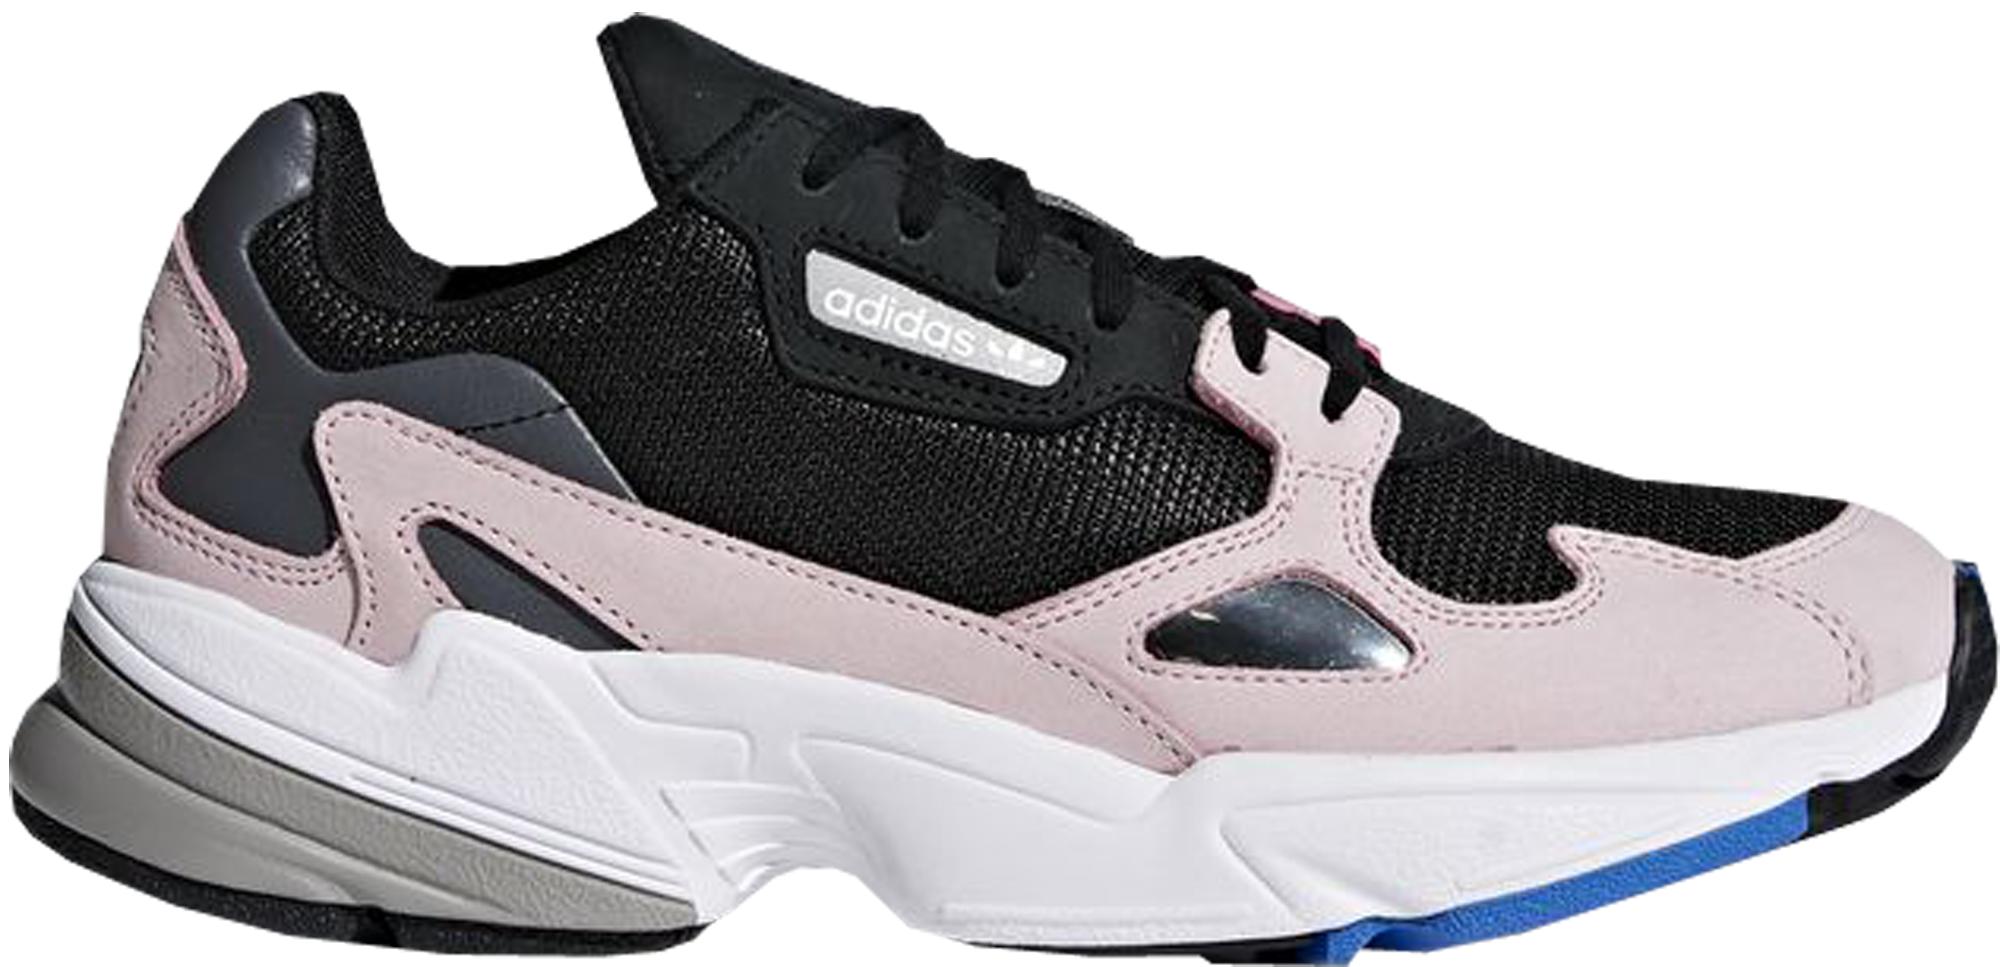 adidas falcon trainers core black light pink